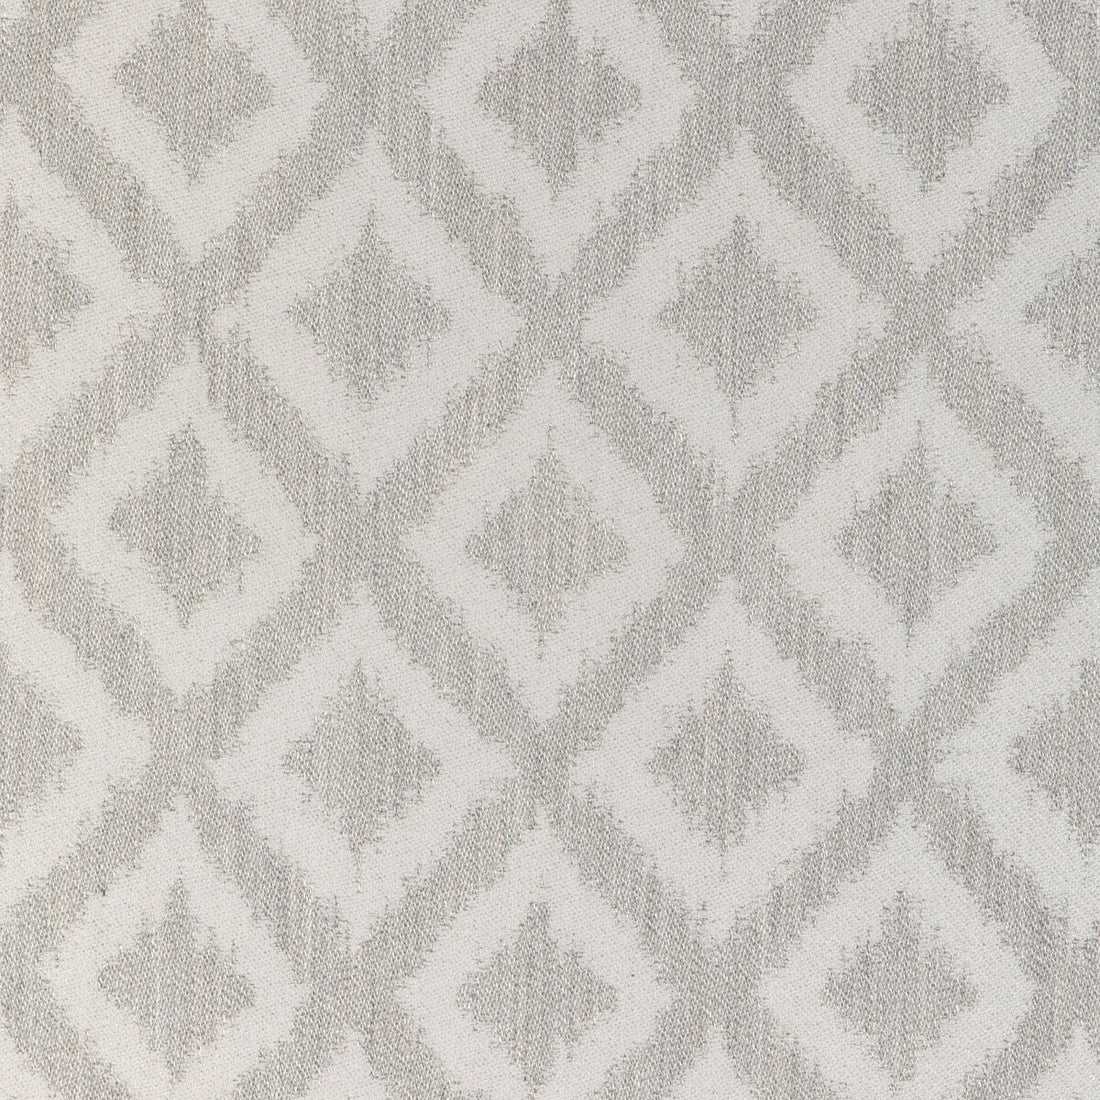 Eastham Breeze fabric in driftwood color - pattern 36933.11.0 - by Kravet Couture in the Riviera collection